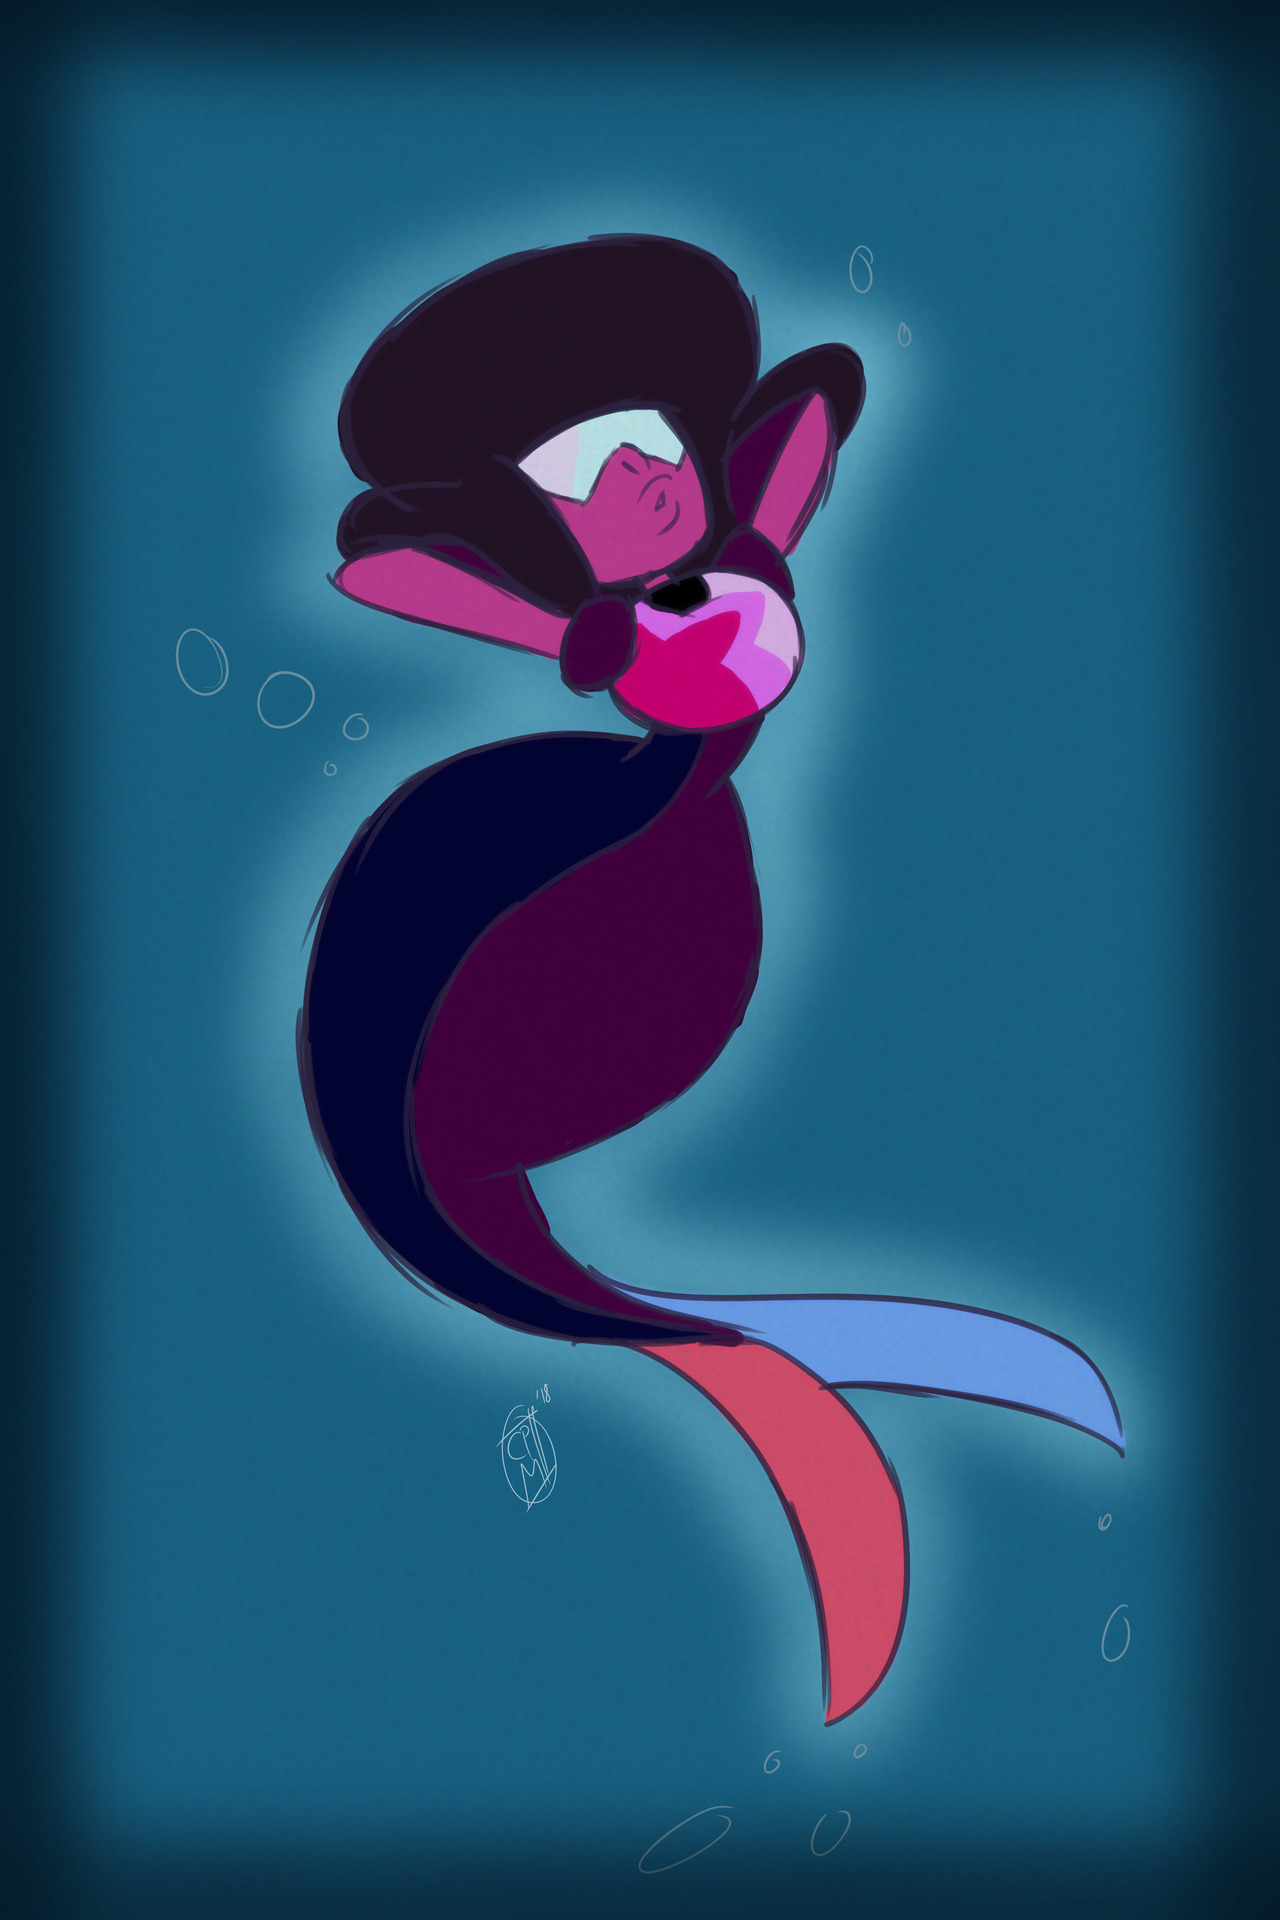 #Mermay2018 Day 7 Super late on this one, but heres Garnet from Steven Universe in mermaid form.